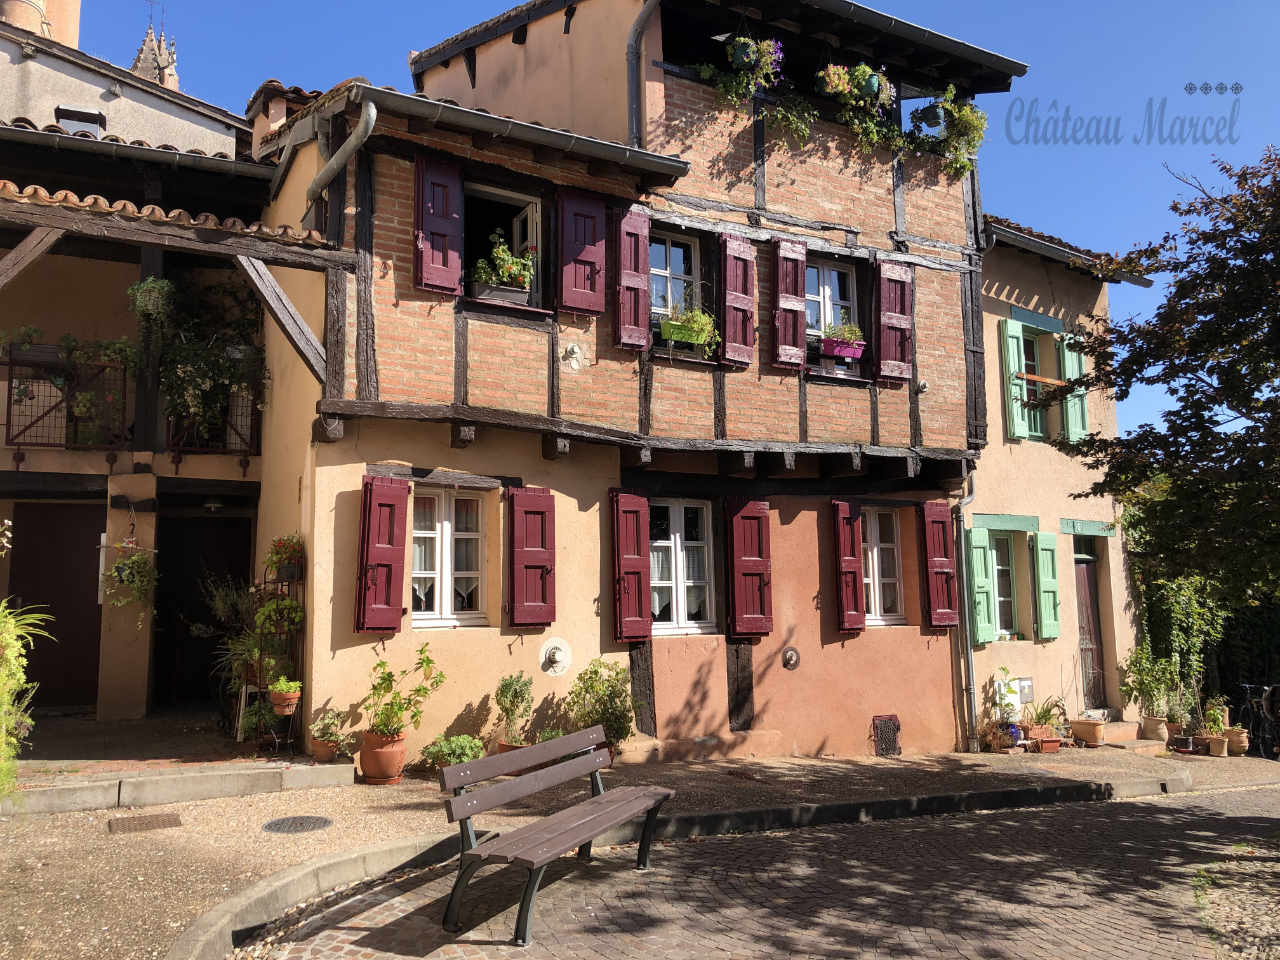 Typical house style in Albi